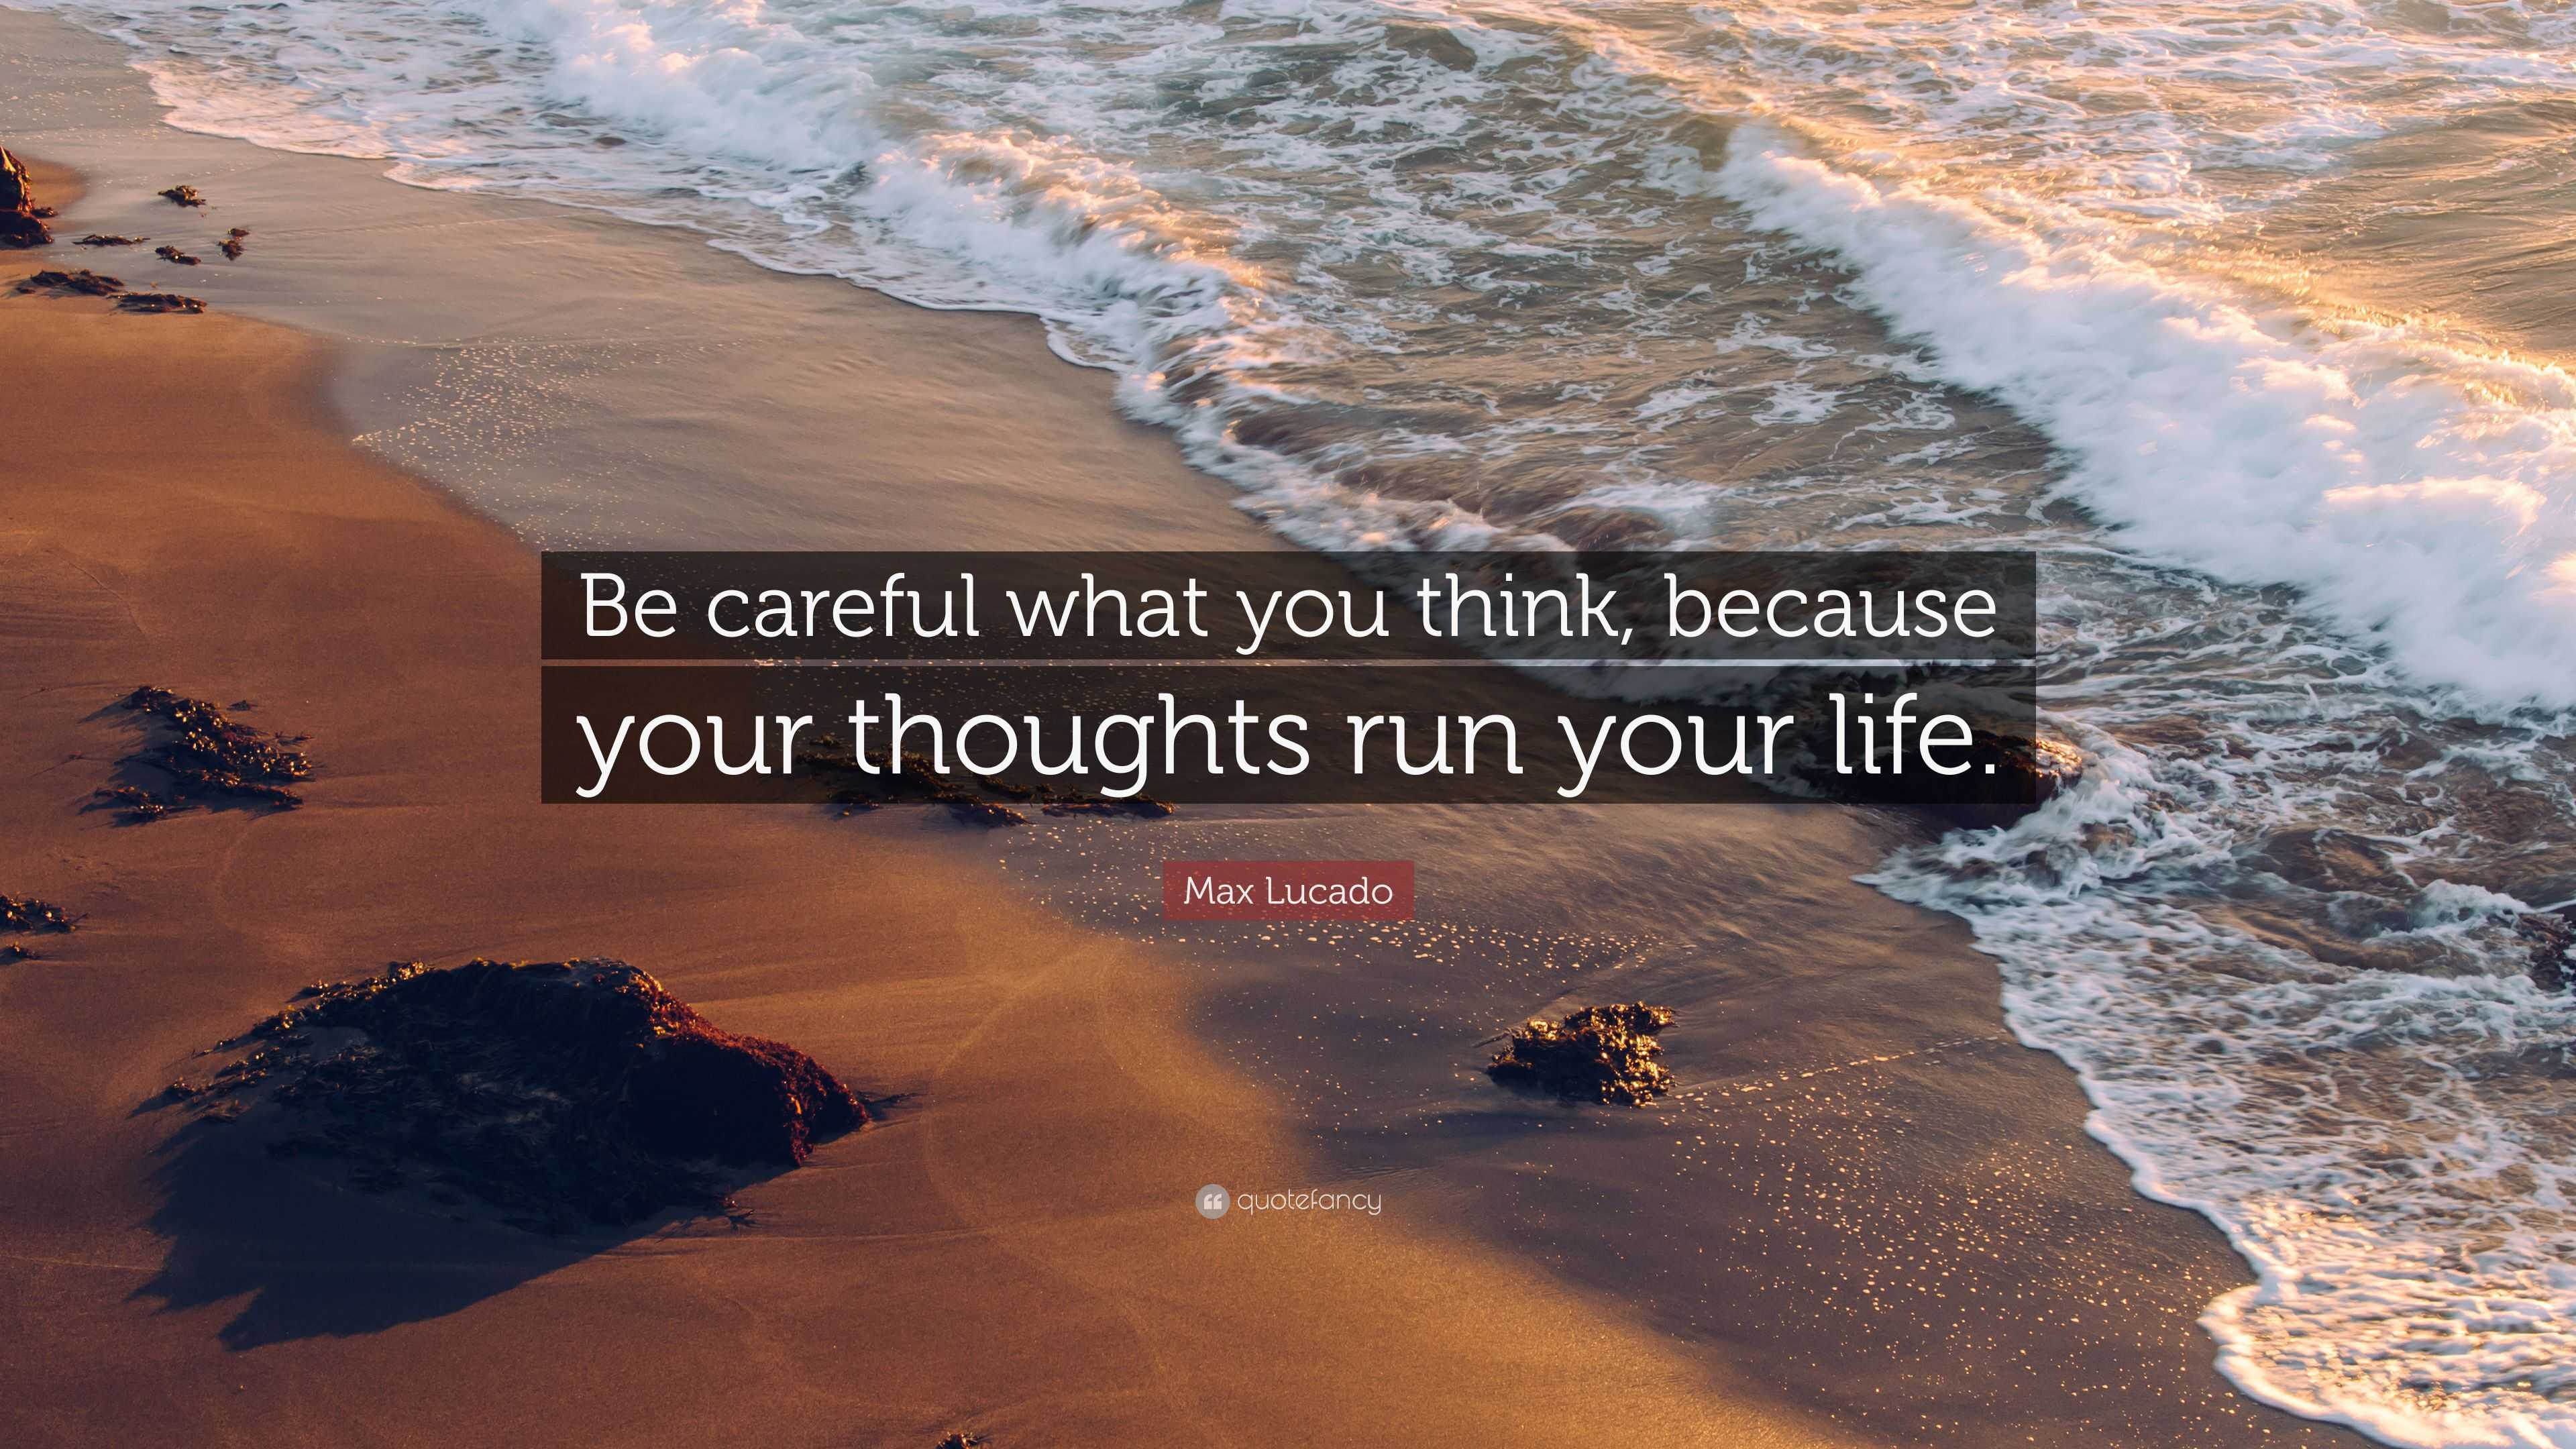 Max Lucado Quote “be Careful What You Think Because Your Thoughts Run Your Life” 7034